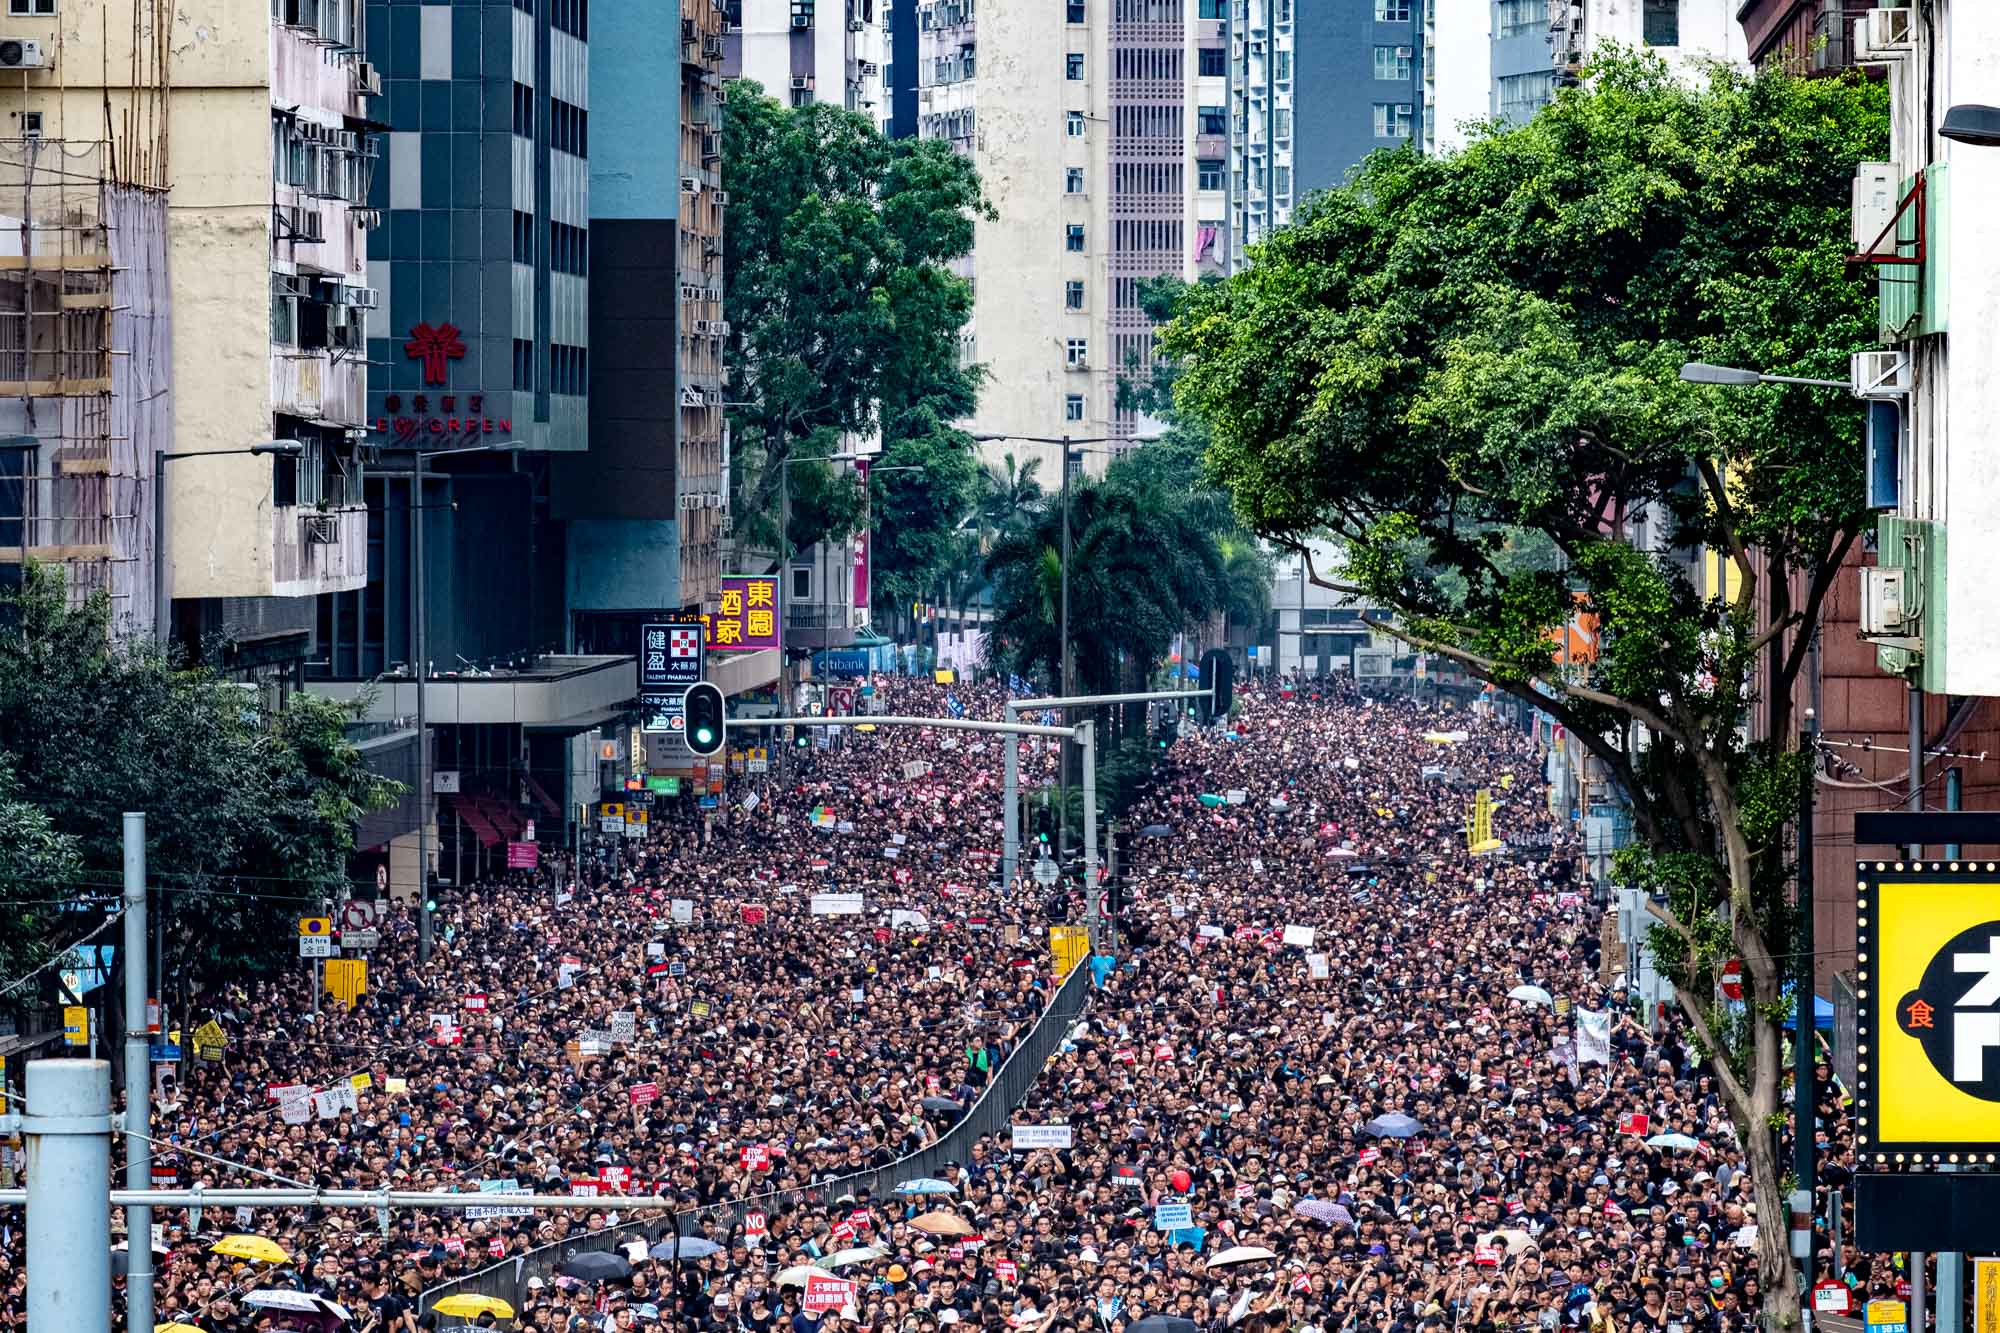 Hundreds of thousands of protesters in Wan Chai protesting the controversial extradition bill on June 16, 2019. Photo by Tomas Wiik